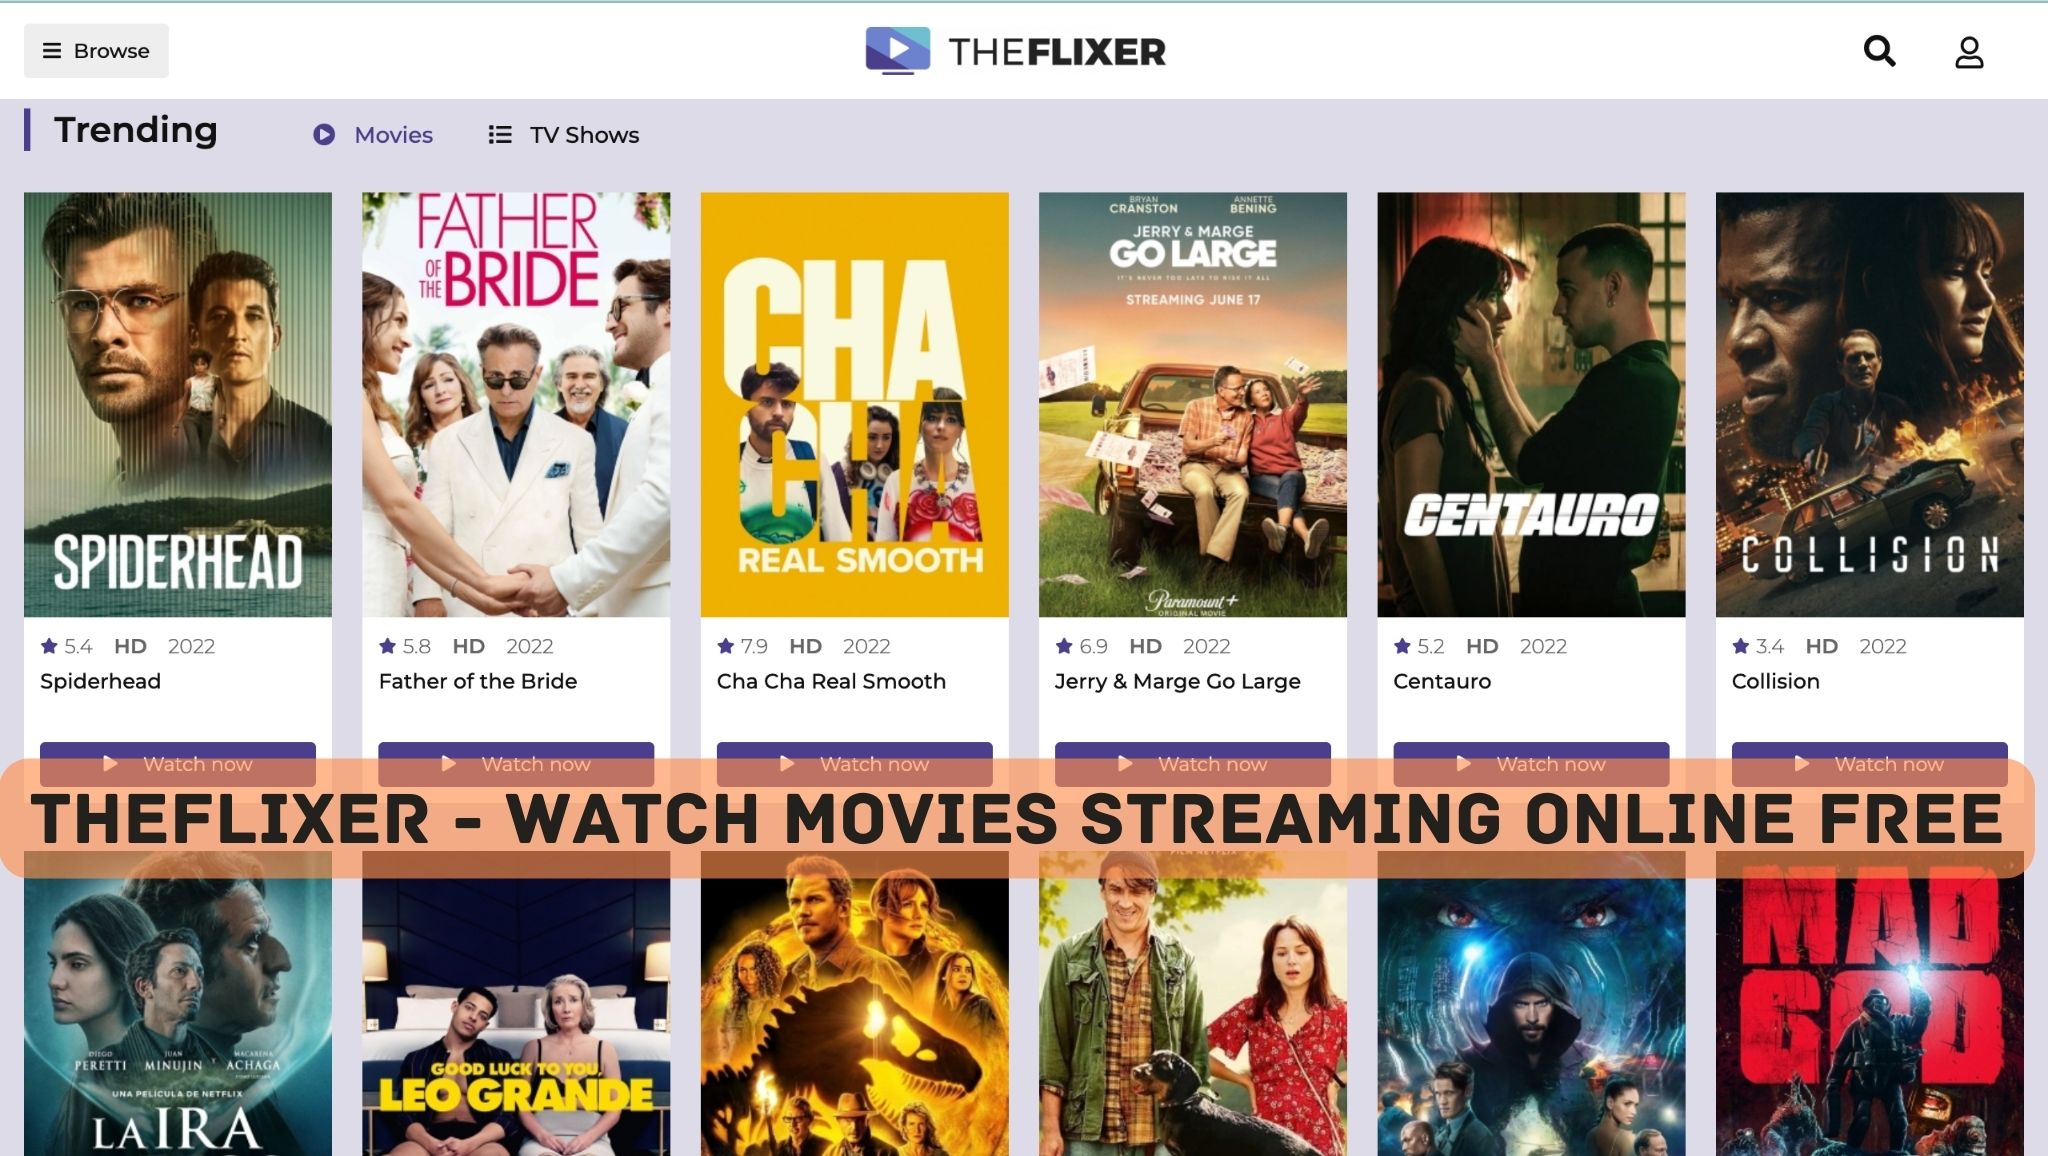 TheFlixer - Watch Movies Streaming Online Free